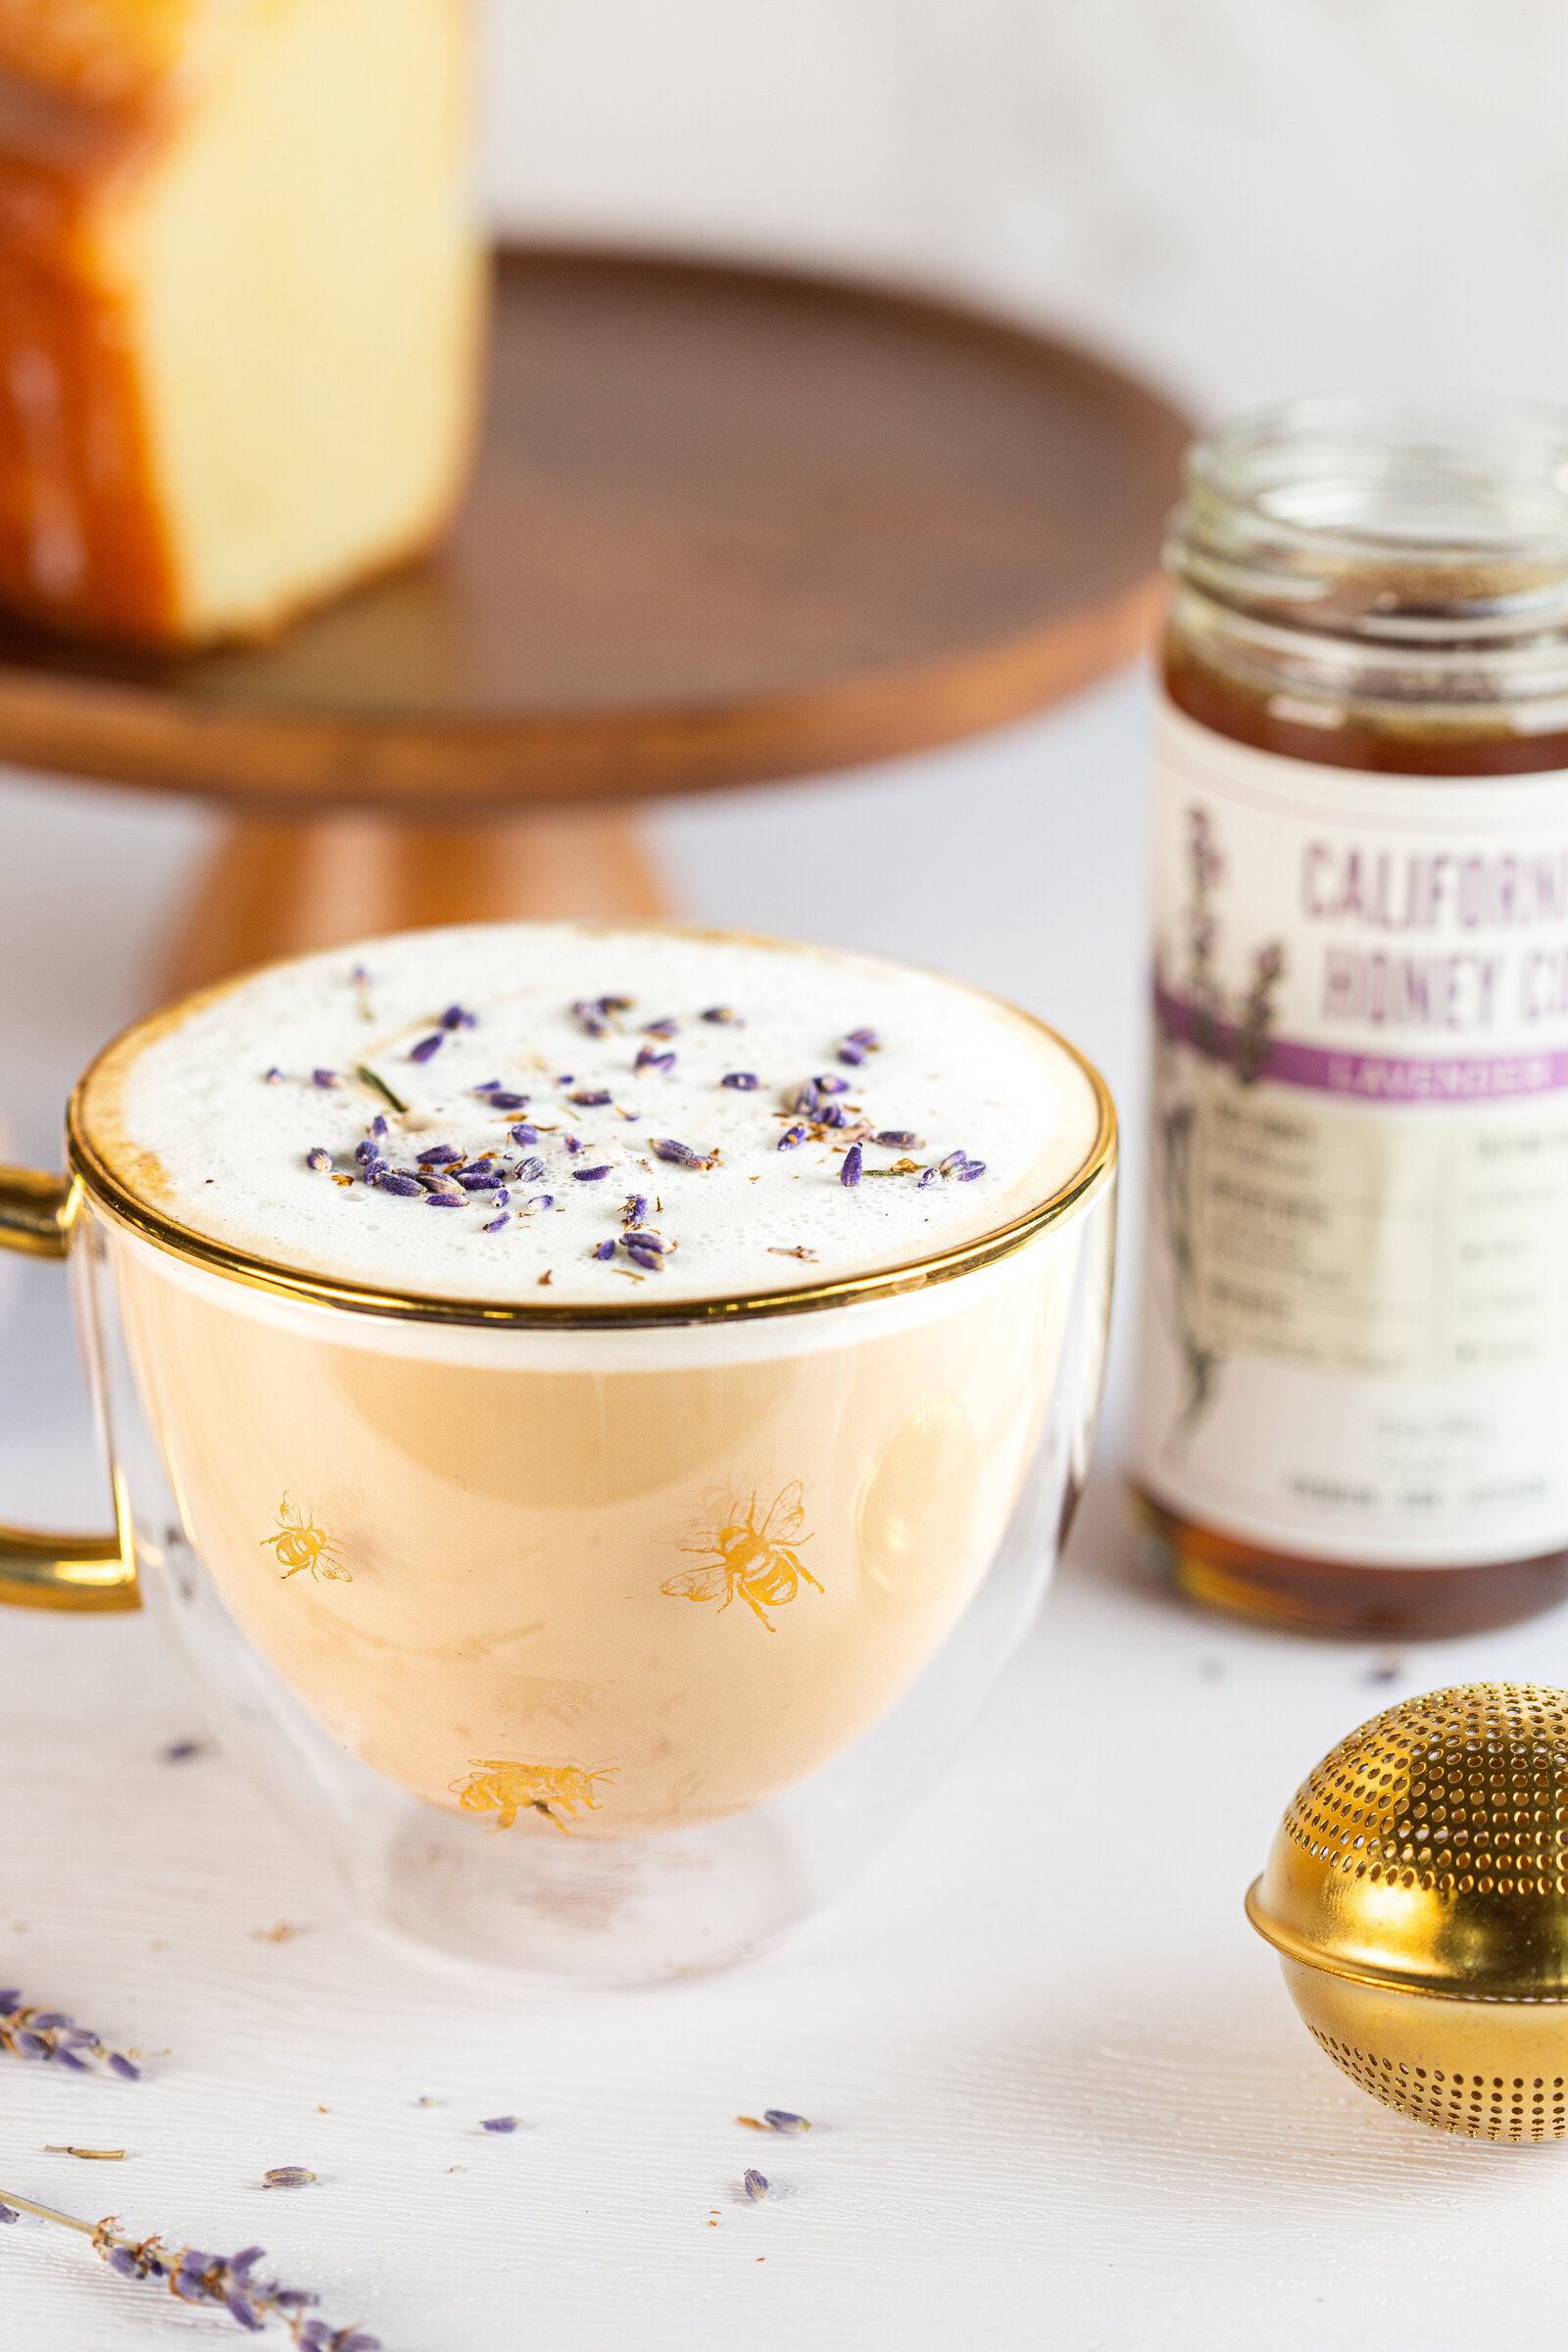 Styled product photography for local honey company featuring gold bee mug and lavender honey latte.